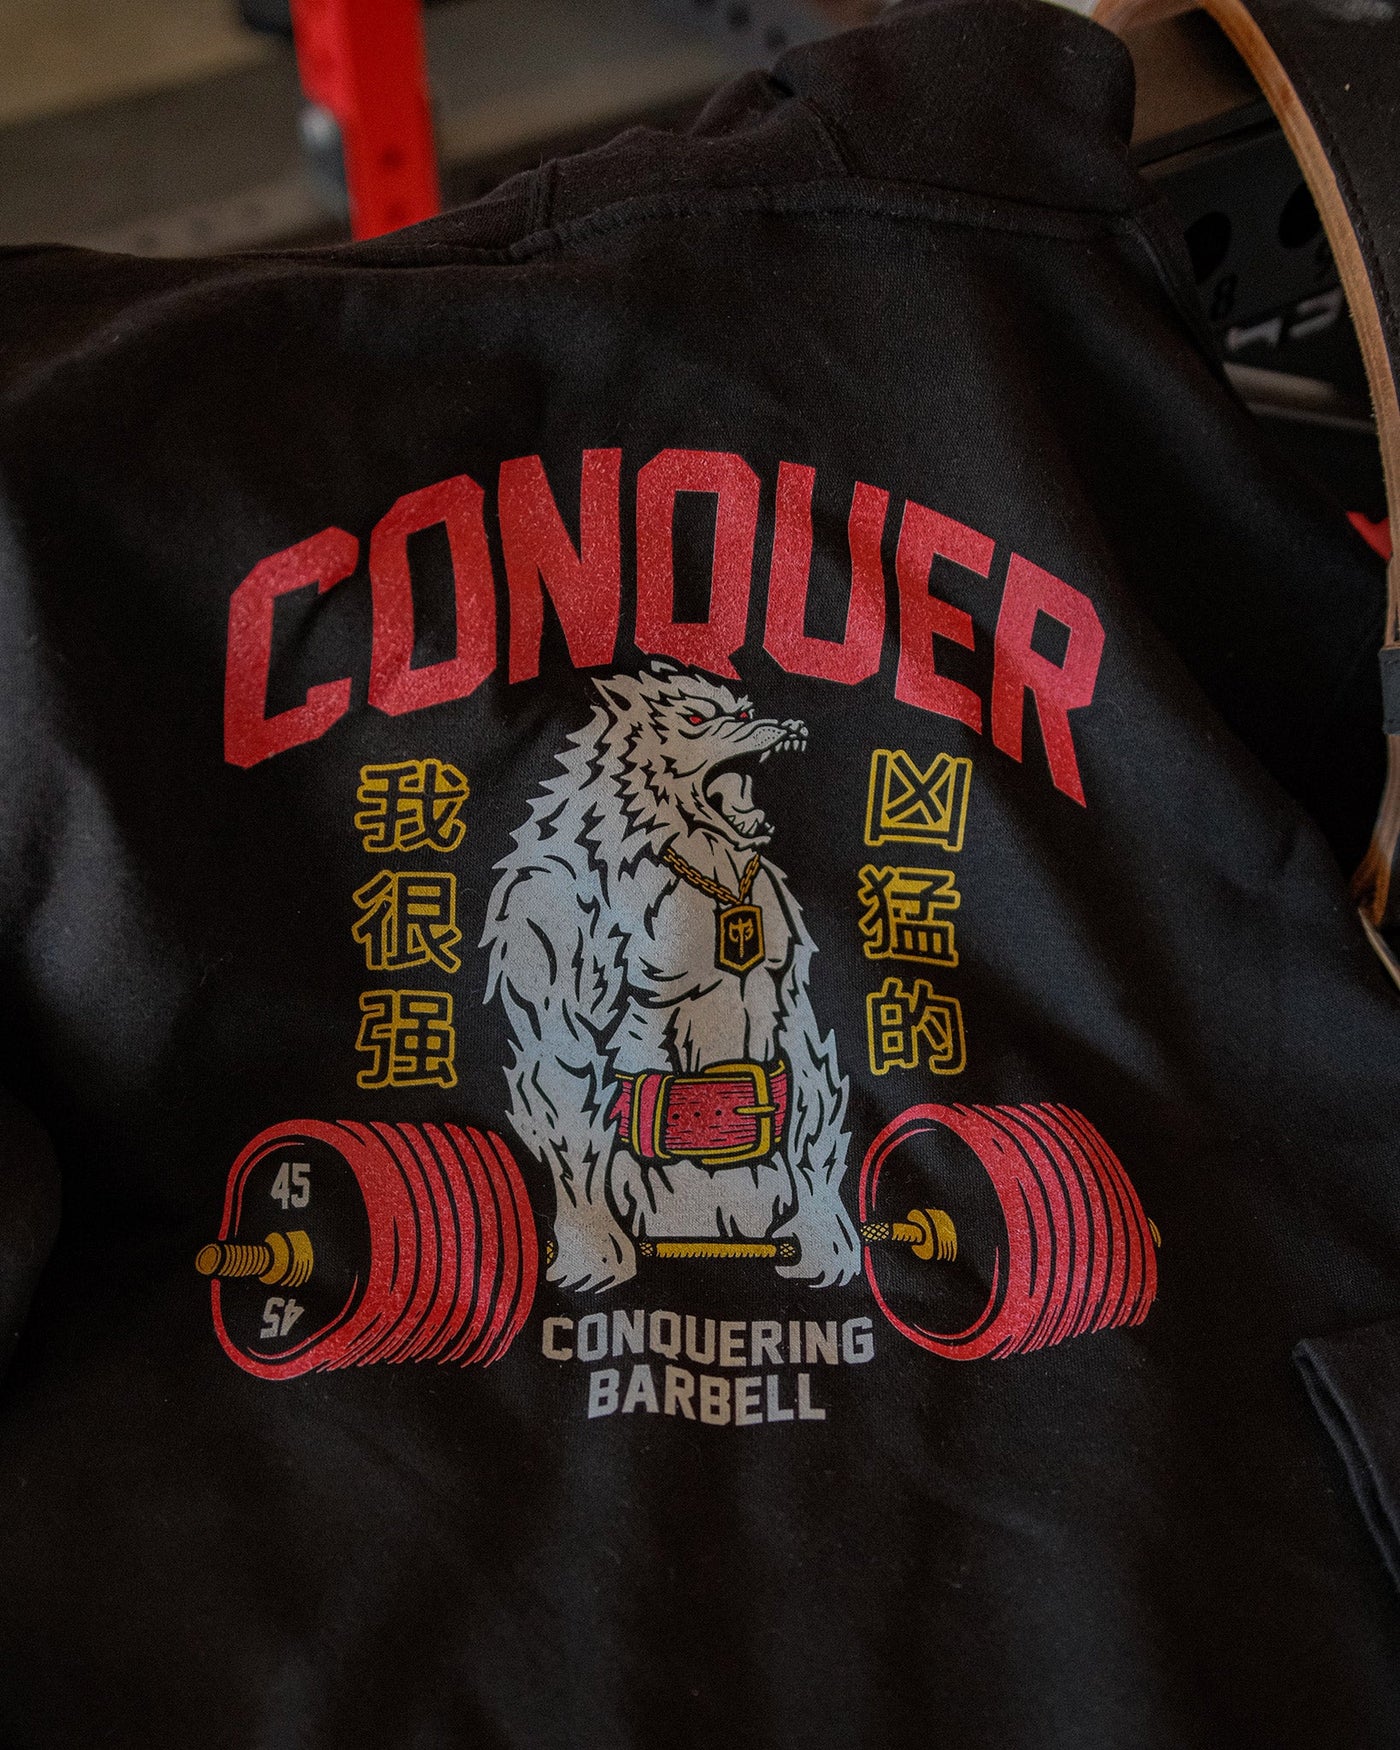 Conquer - Deadlifting Wolf V2 - on Black Pullover Hoodie - Conquering Barbell